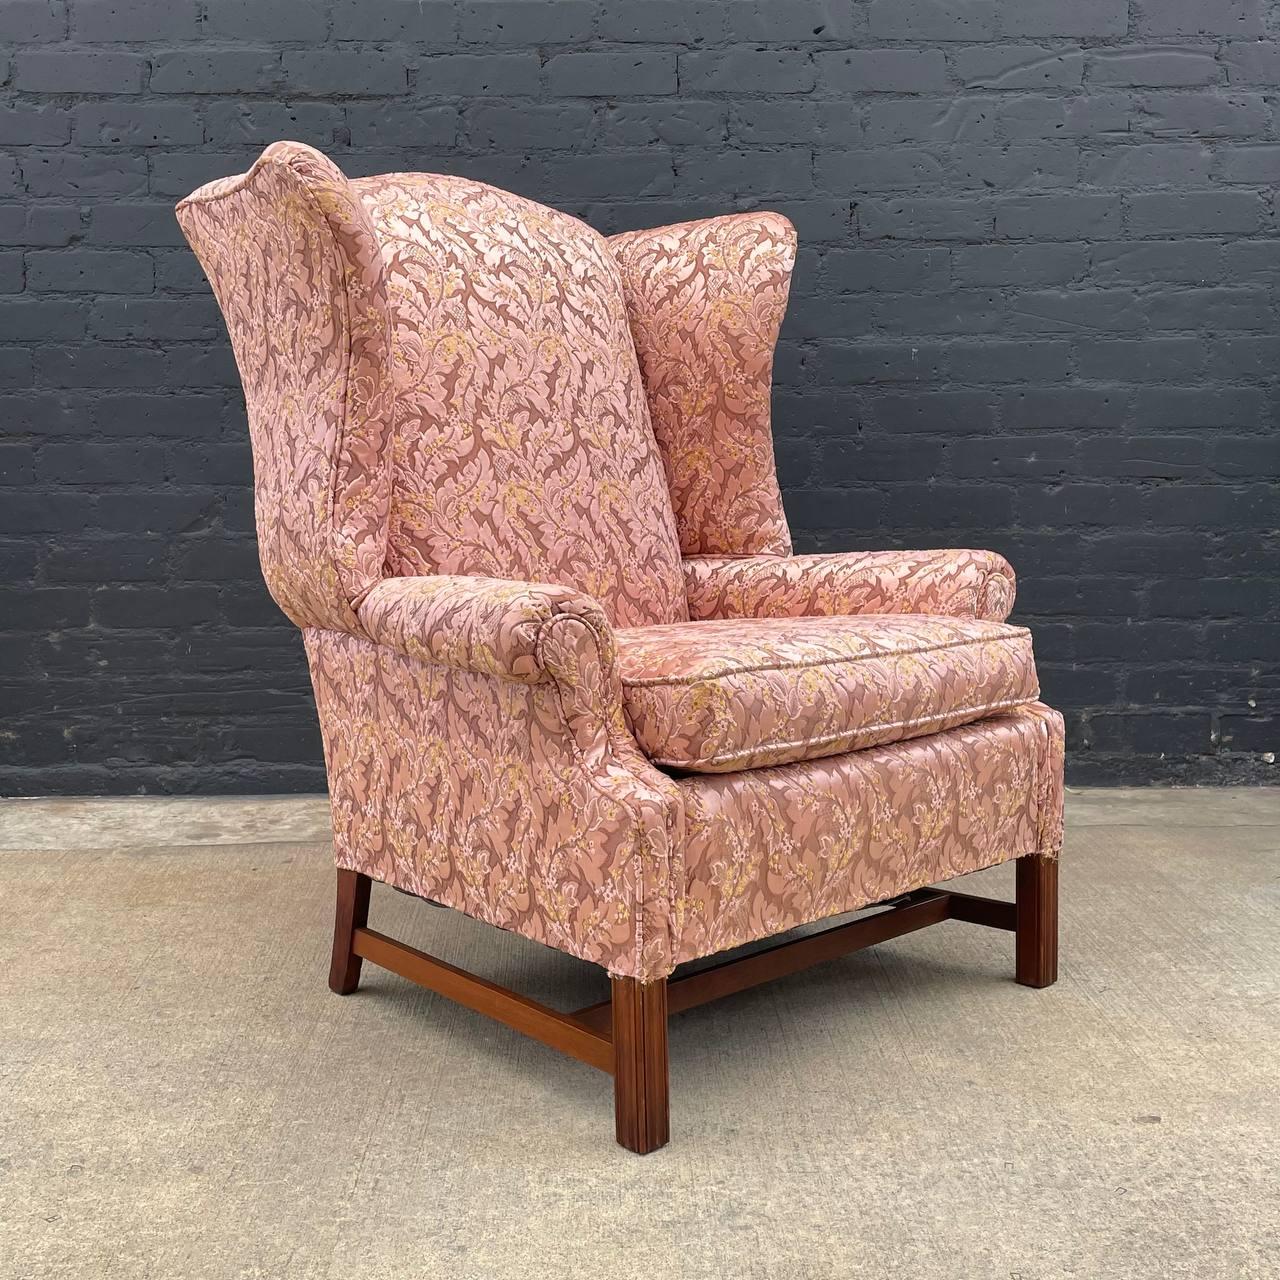 Antique Georgian English Style Wing Back Lounge Chair

Designer: Unknown
Country: United Stated
Manufacturer: Unknown
Materials: Original Upholstery, Mahogany 
Style: American Antique
Year: 1940’s

$1,895 

Dimensions:
46”H x 36”W x